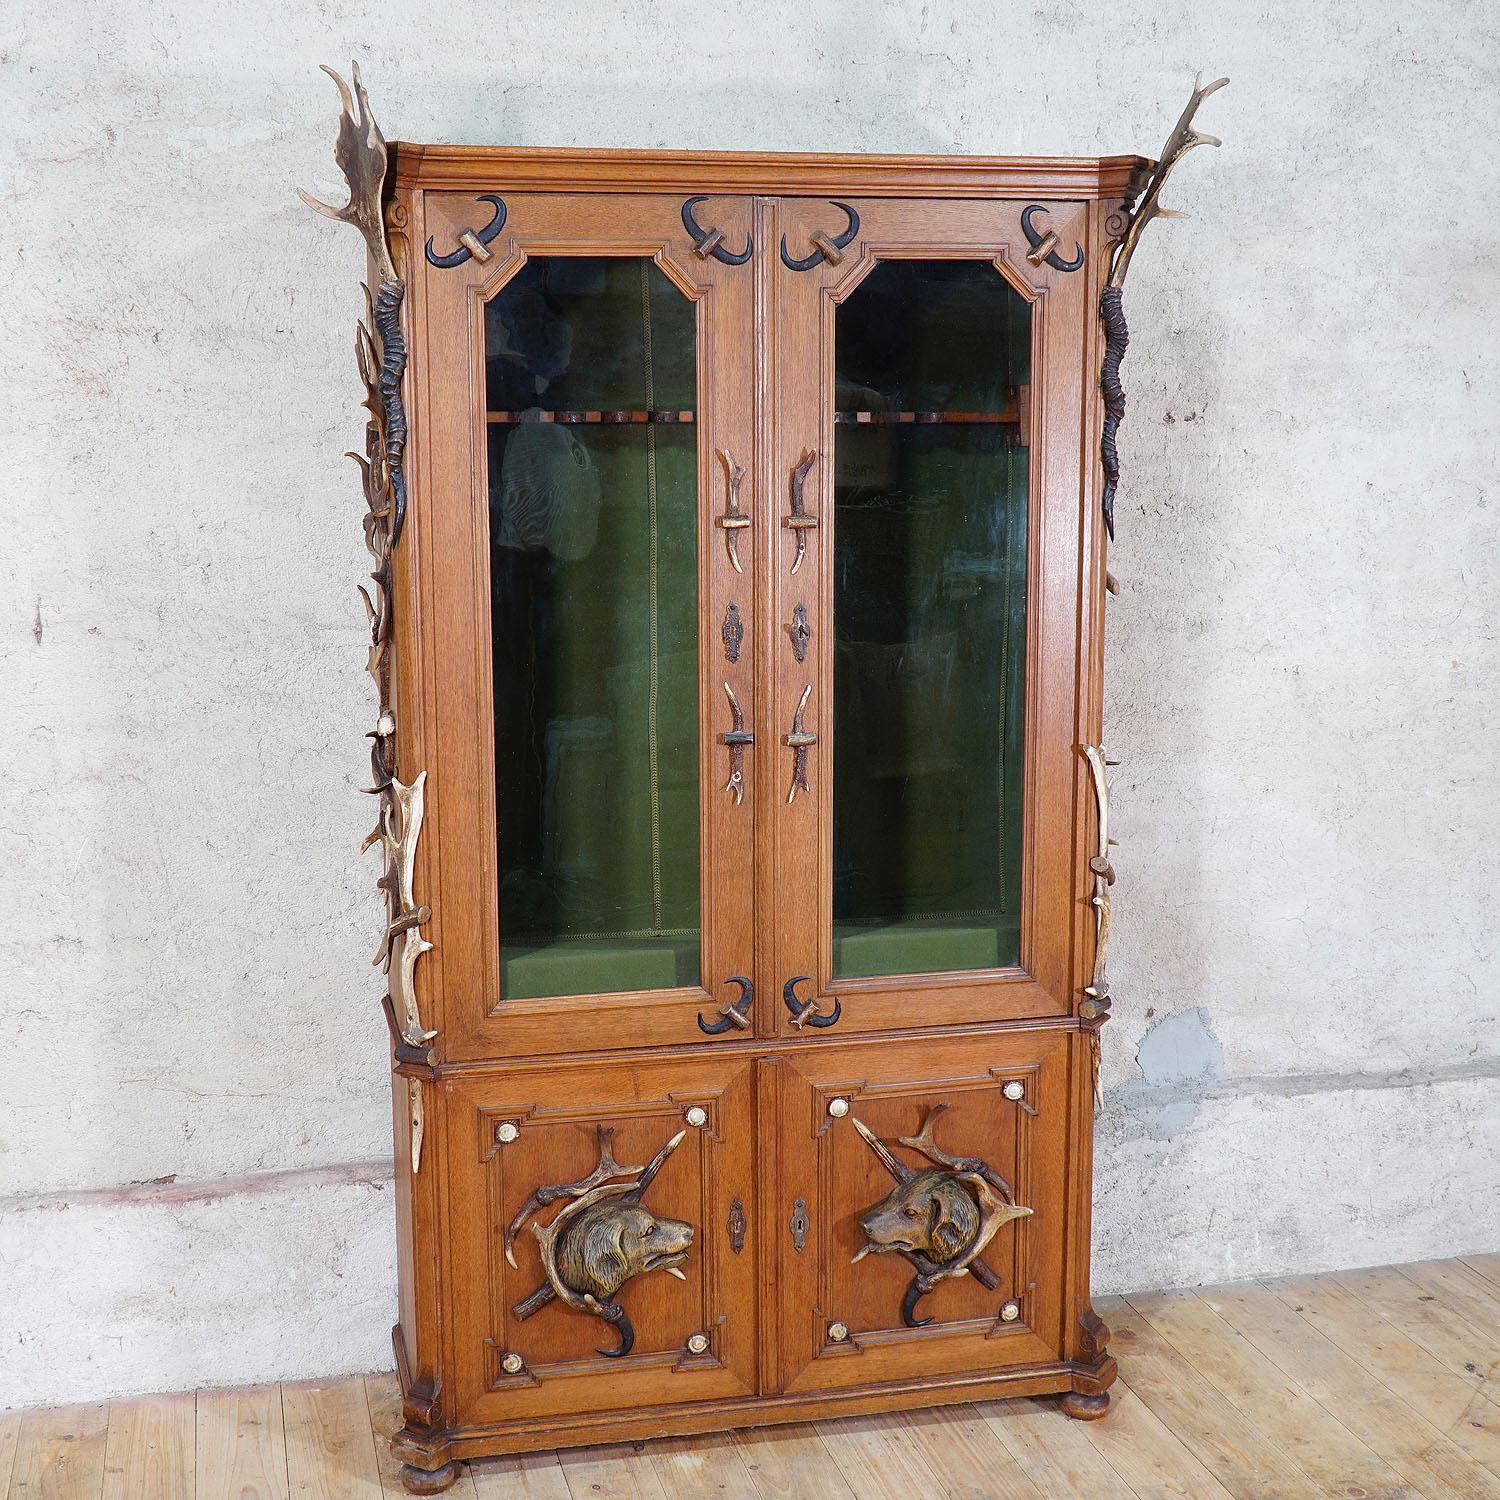 A large antique oak wood gun cabinet decorated with several original antlers from the deer, the fallow deer, antelope and chamois. Elaborately manufactured with many details like the covers of the locks which are made made of antler. Booth lower